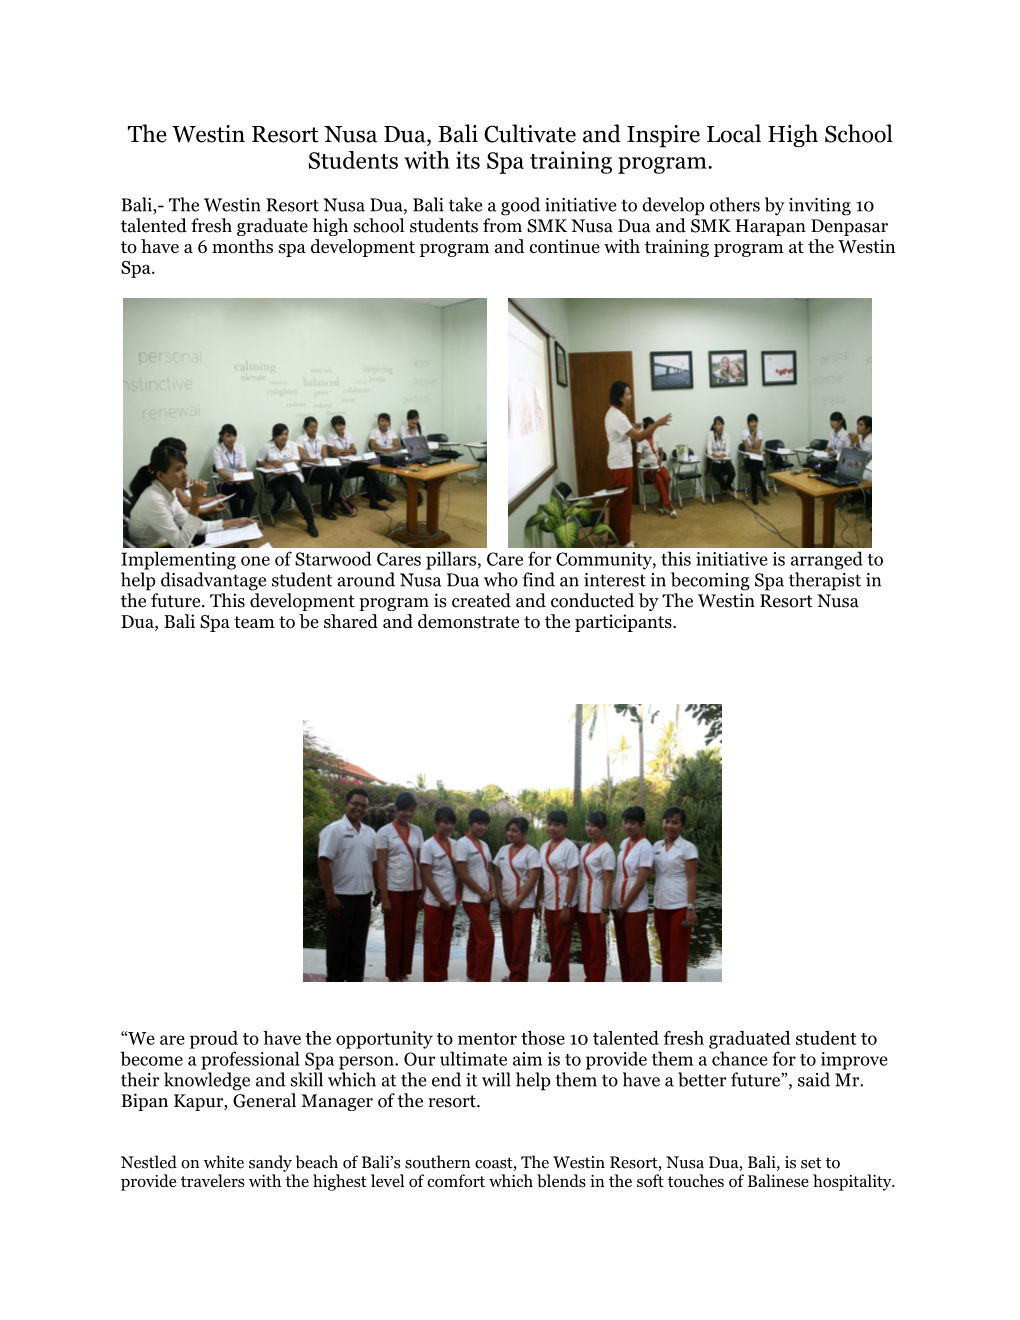 The Westin Resort Nusa Dua, Bali Cultivate and Inspire Local High School Students With